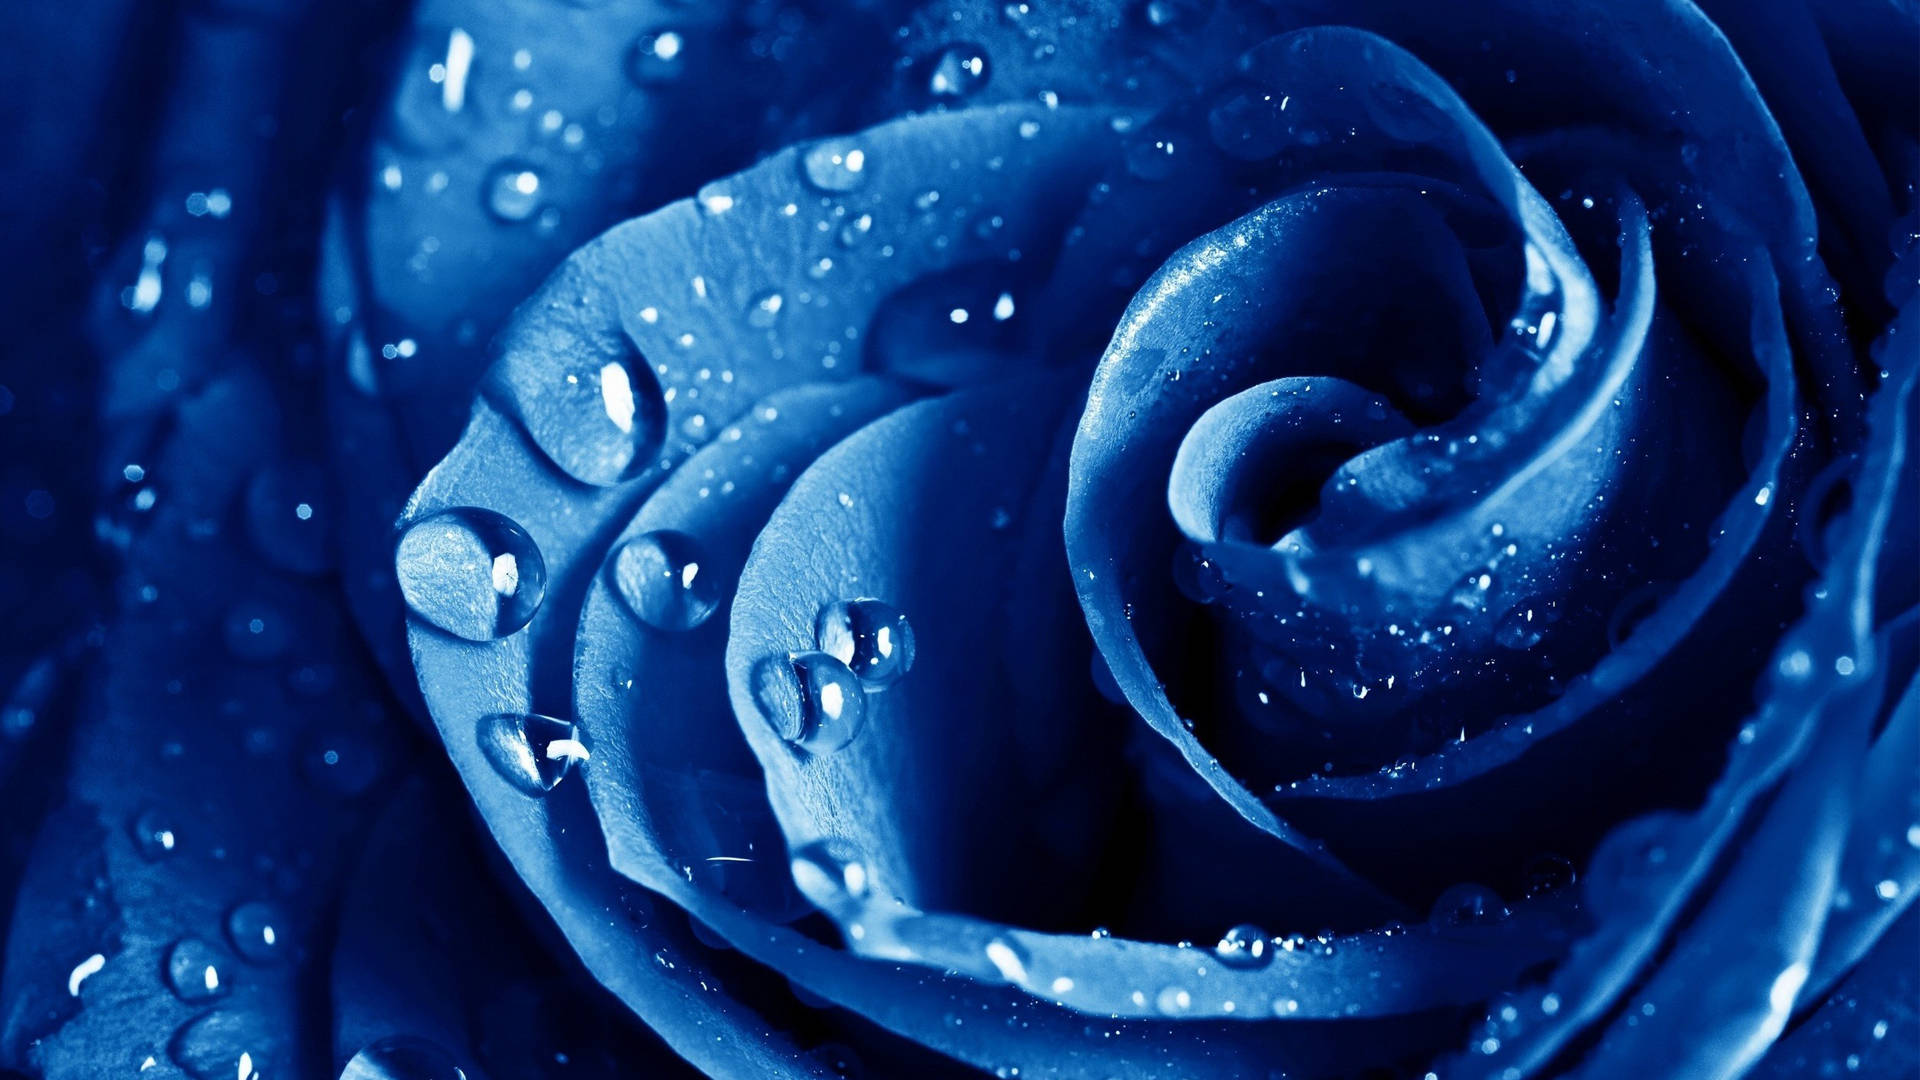 Neon Blue Aesthetic Rose Water Droplets Background